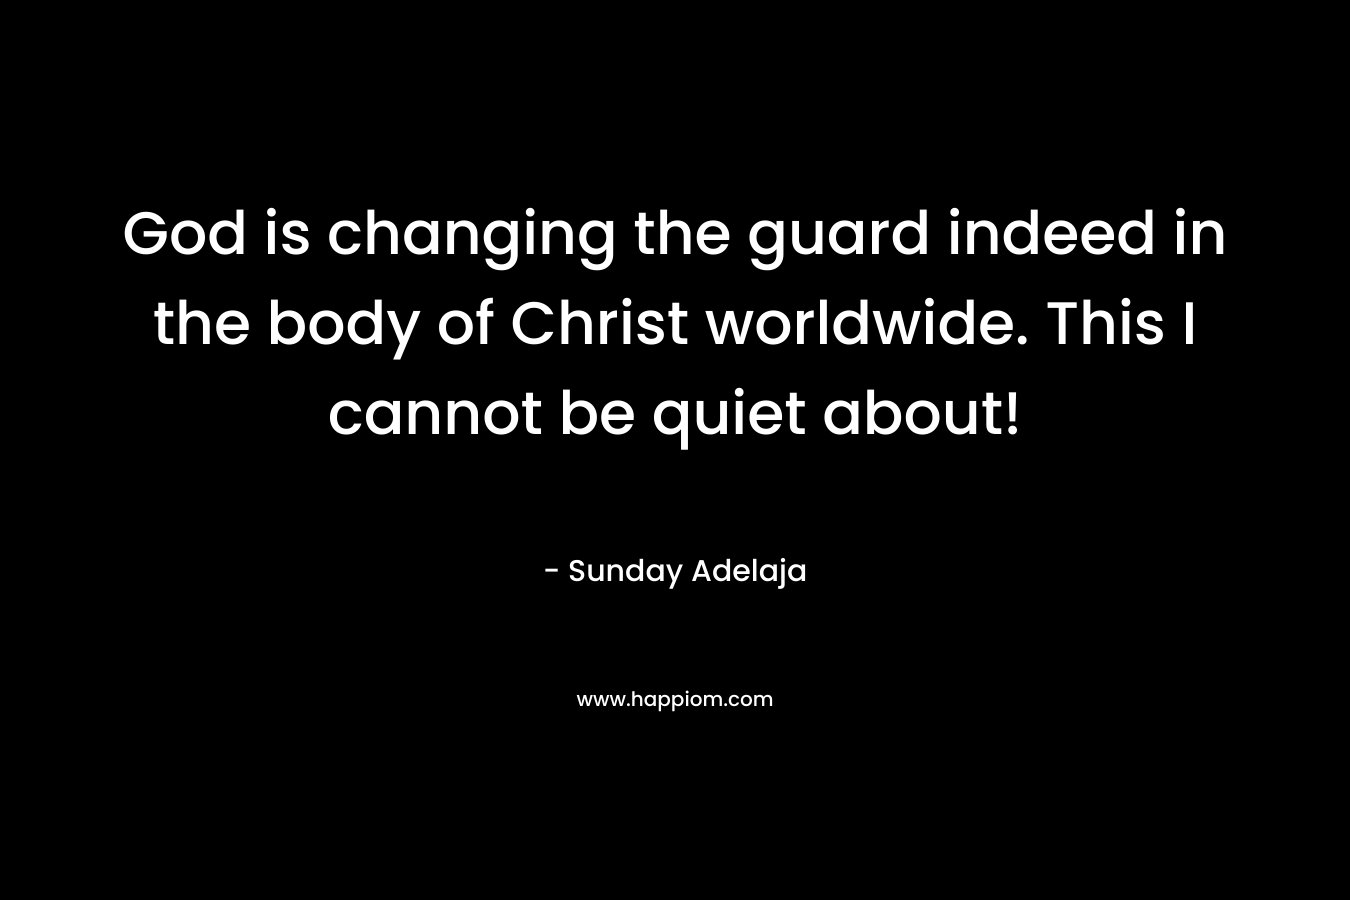 God is changing the guard indeed in the body of Christ worldwide. This I cannot be quiet about!